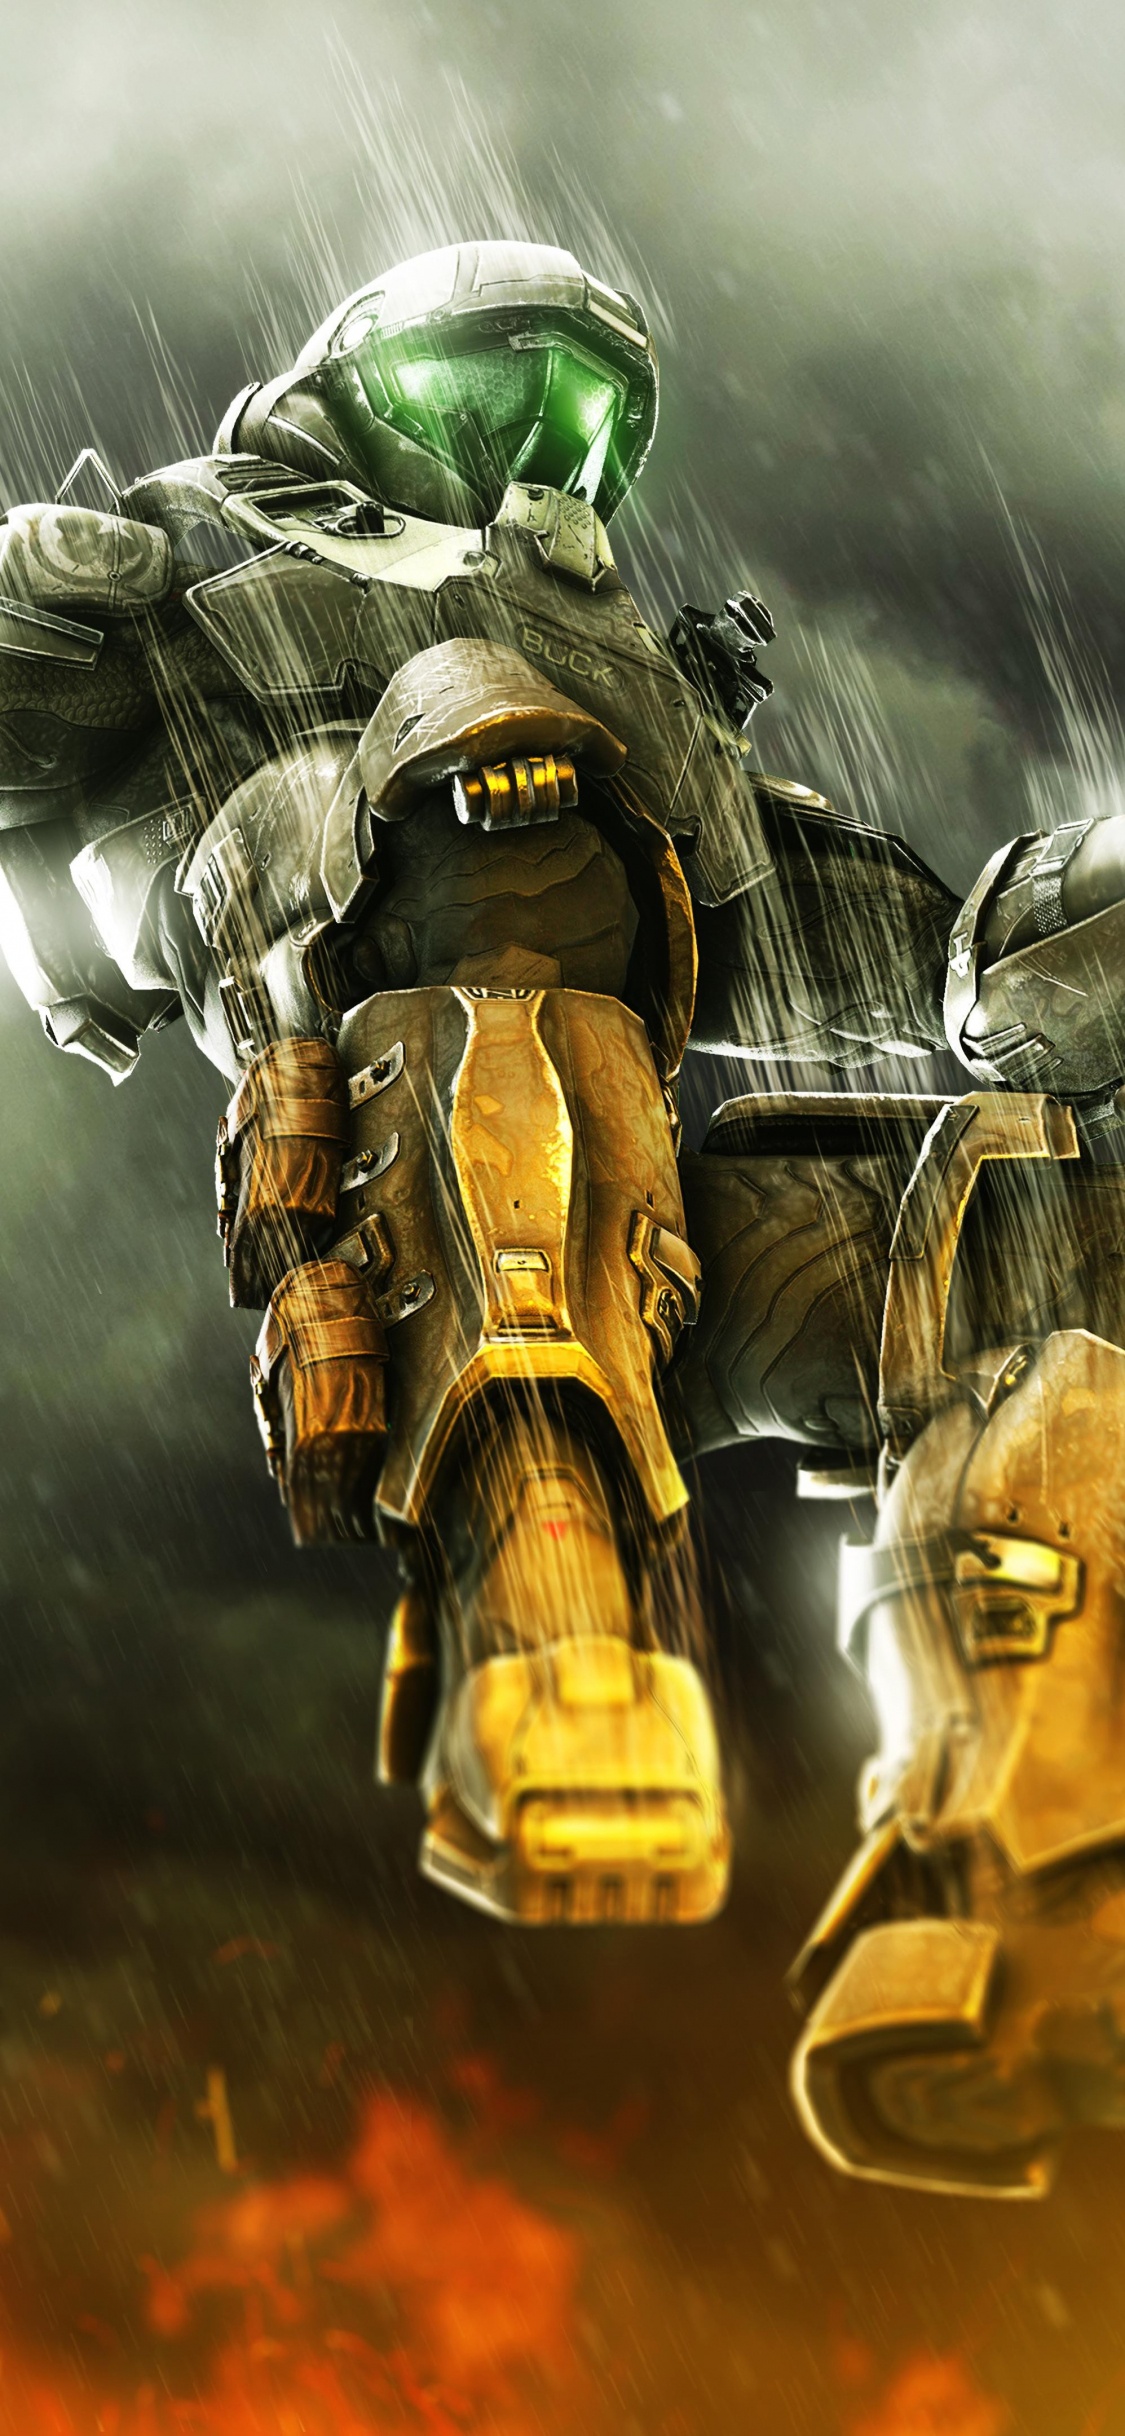 Halo 3, Master Chief, pc Game, Freestyle Motocross, Motocross. Wallpaper in 1125x2436 Resolution